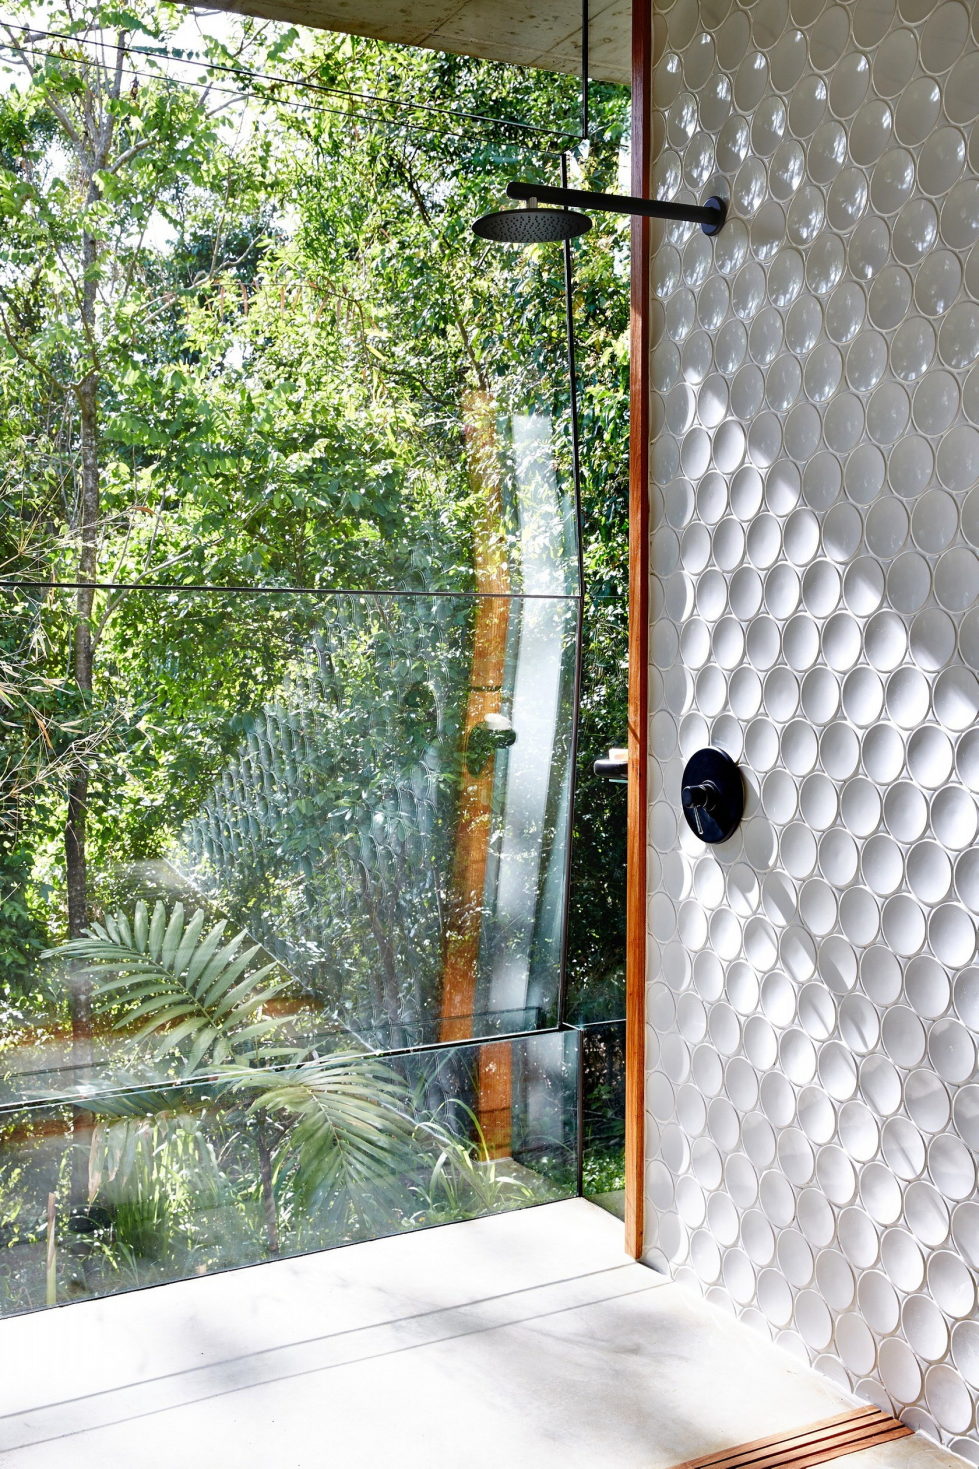 The glass house Planchonella in the tropical forest from Jesse Bennett Architect 22